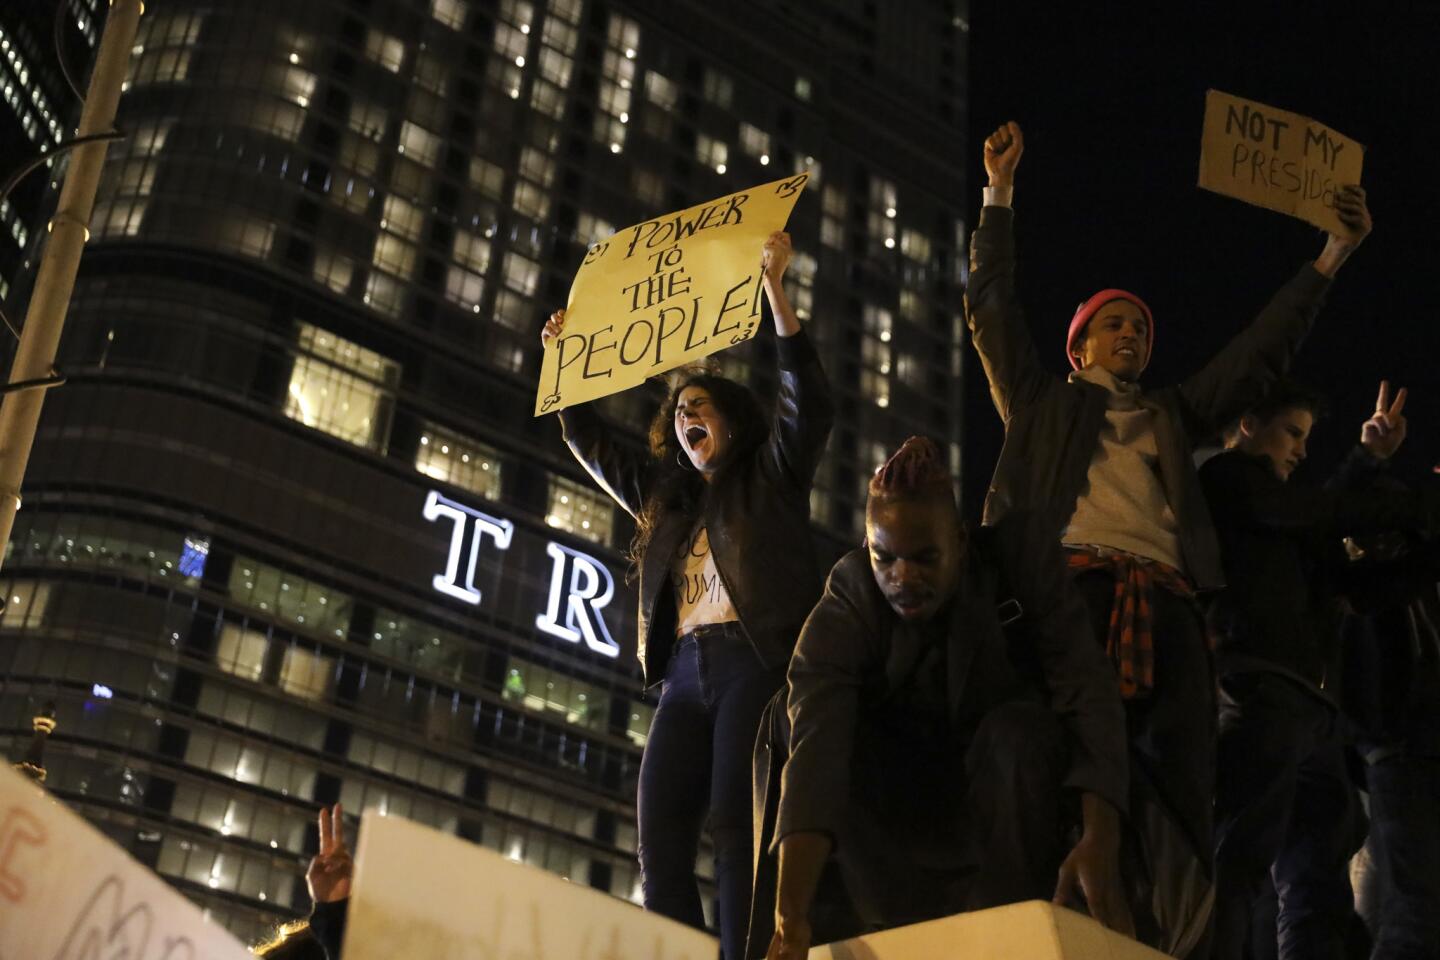 Anti-Trump protesters march in downtown Chicago